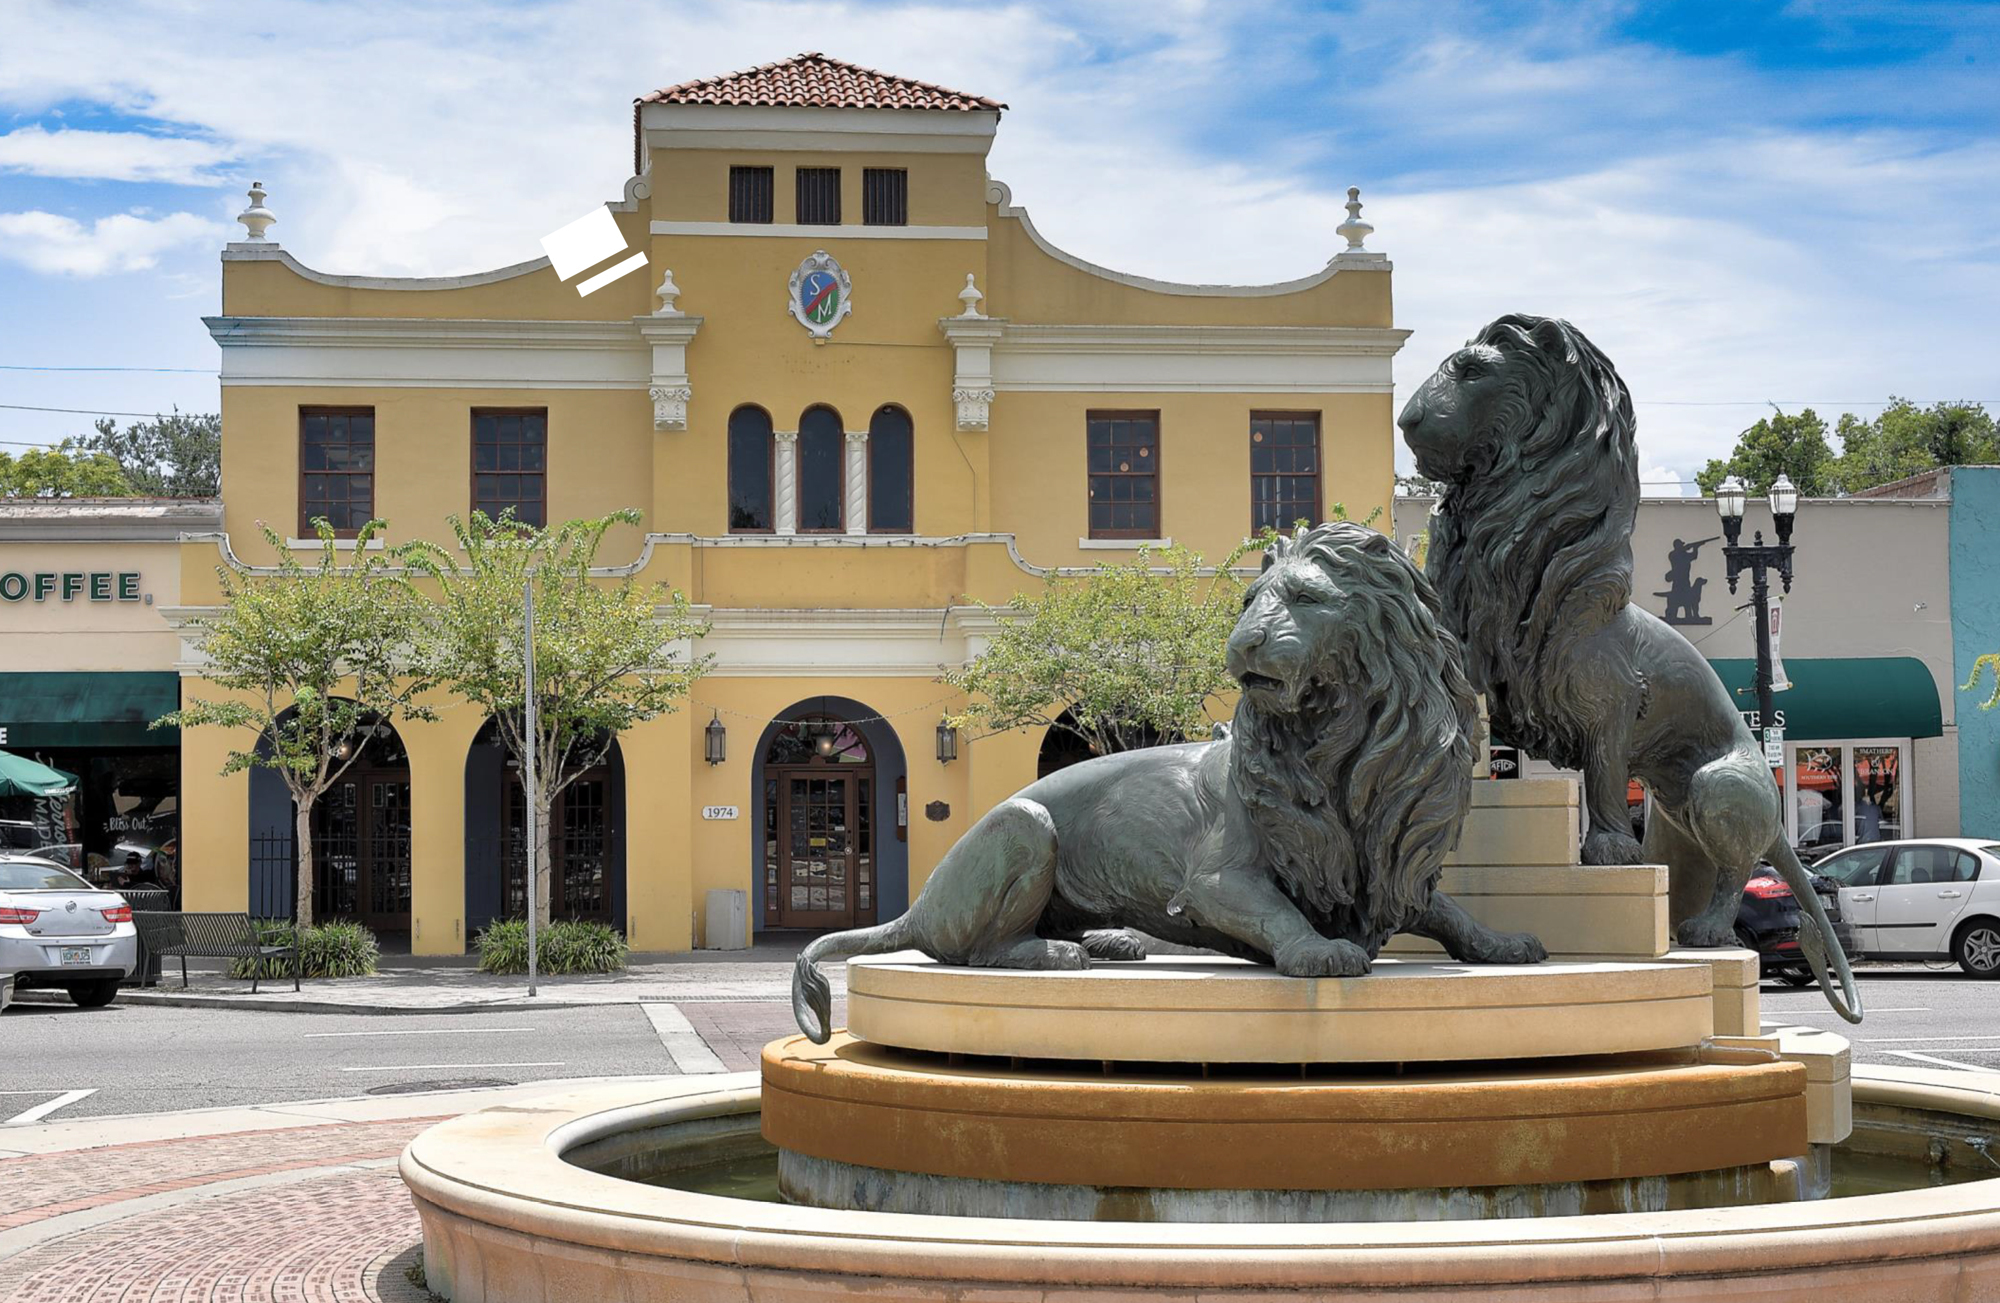 The buildings are near the lions sculpture in San Marco Square.